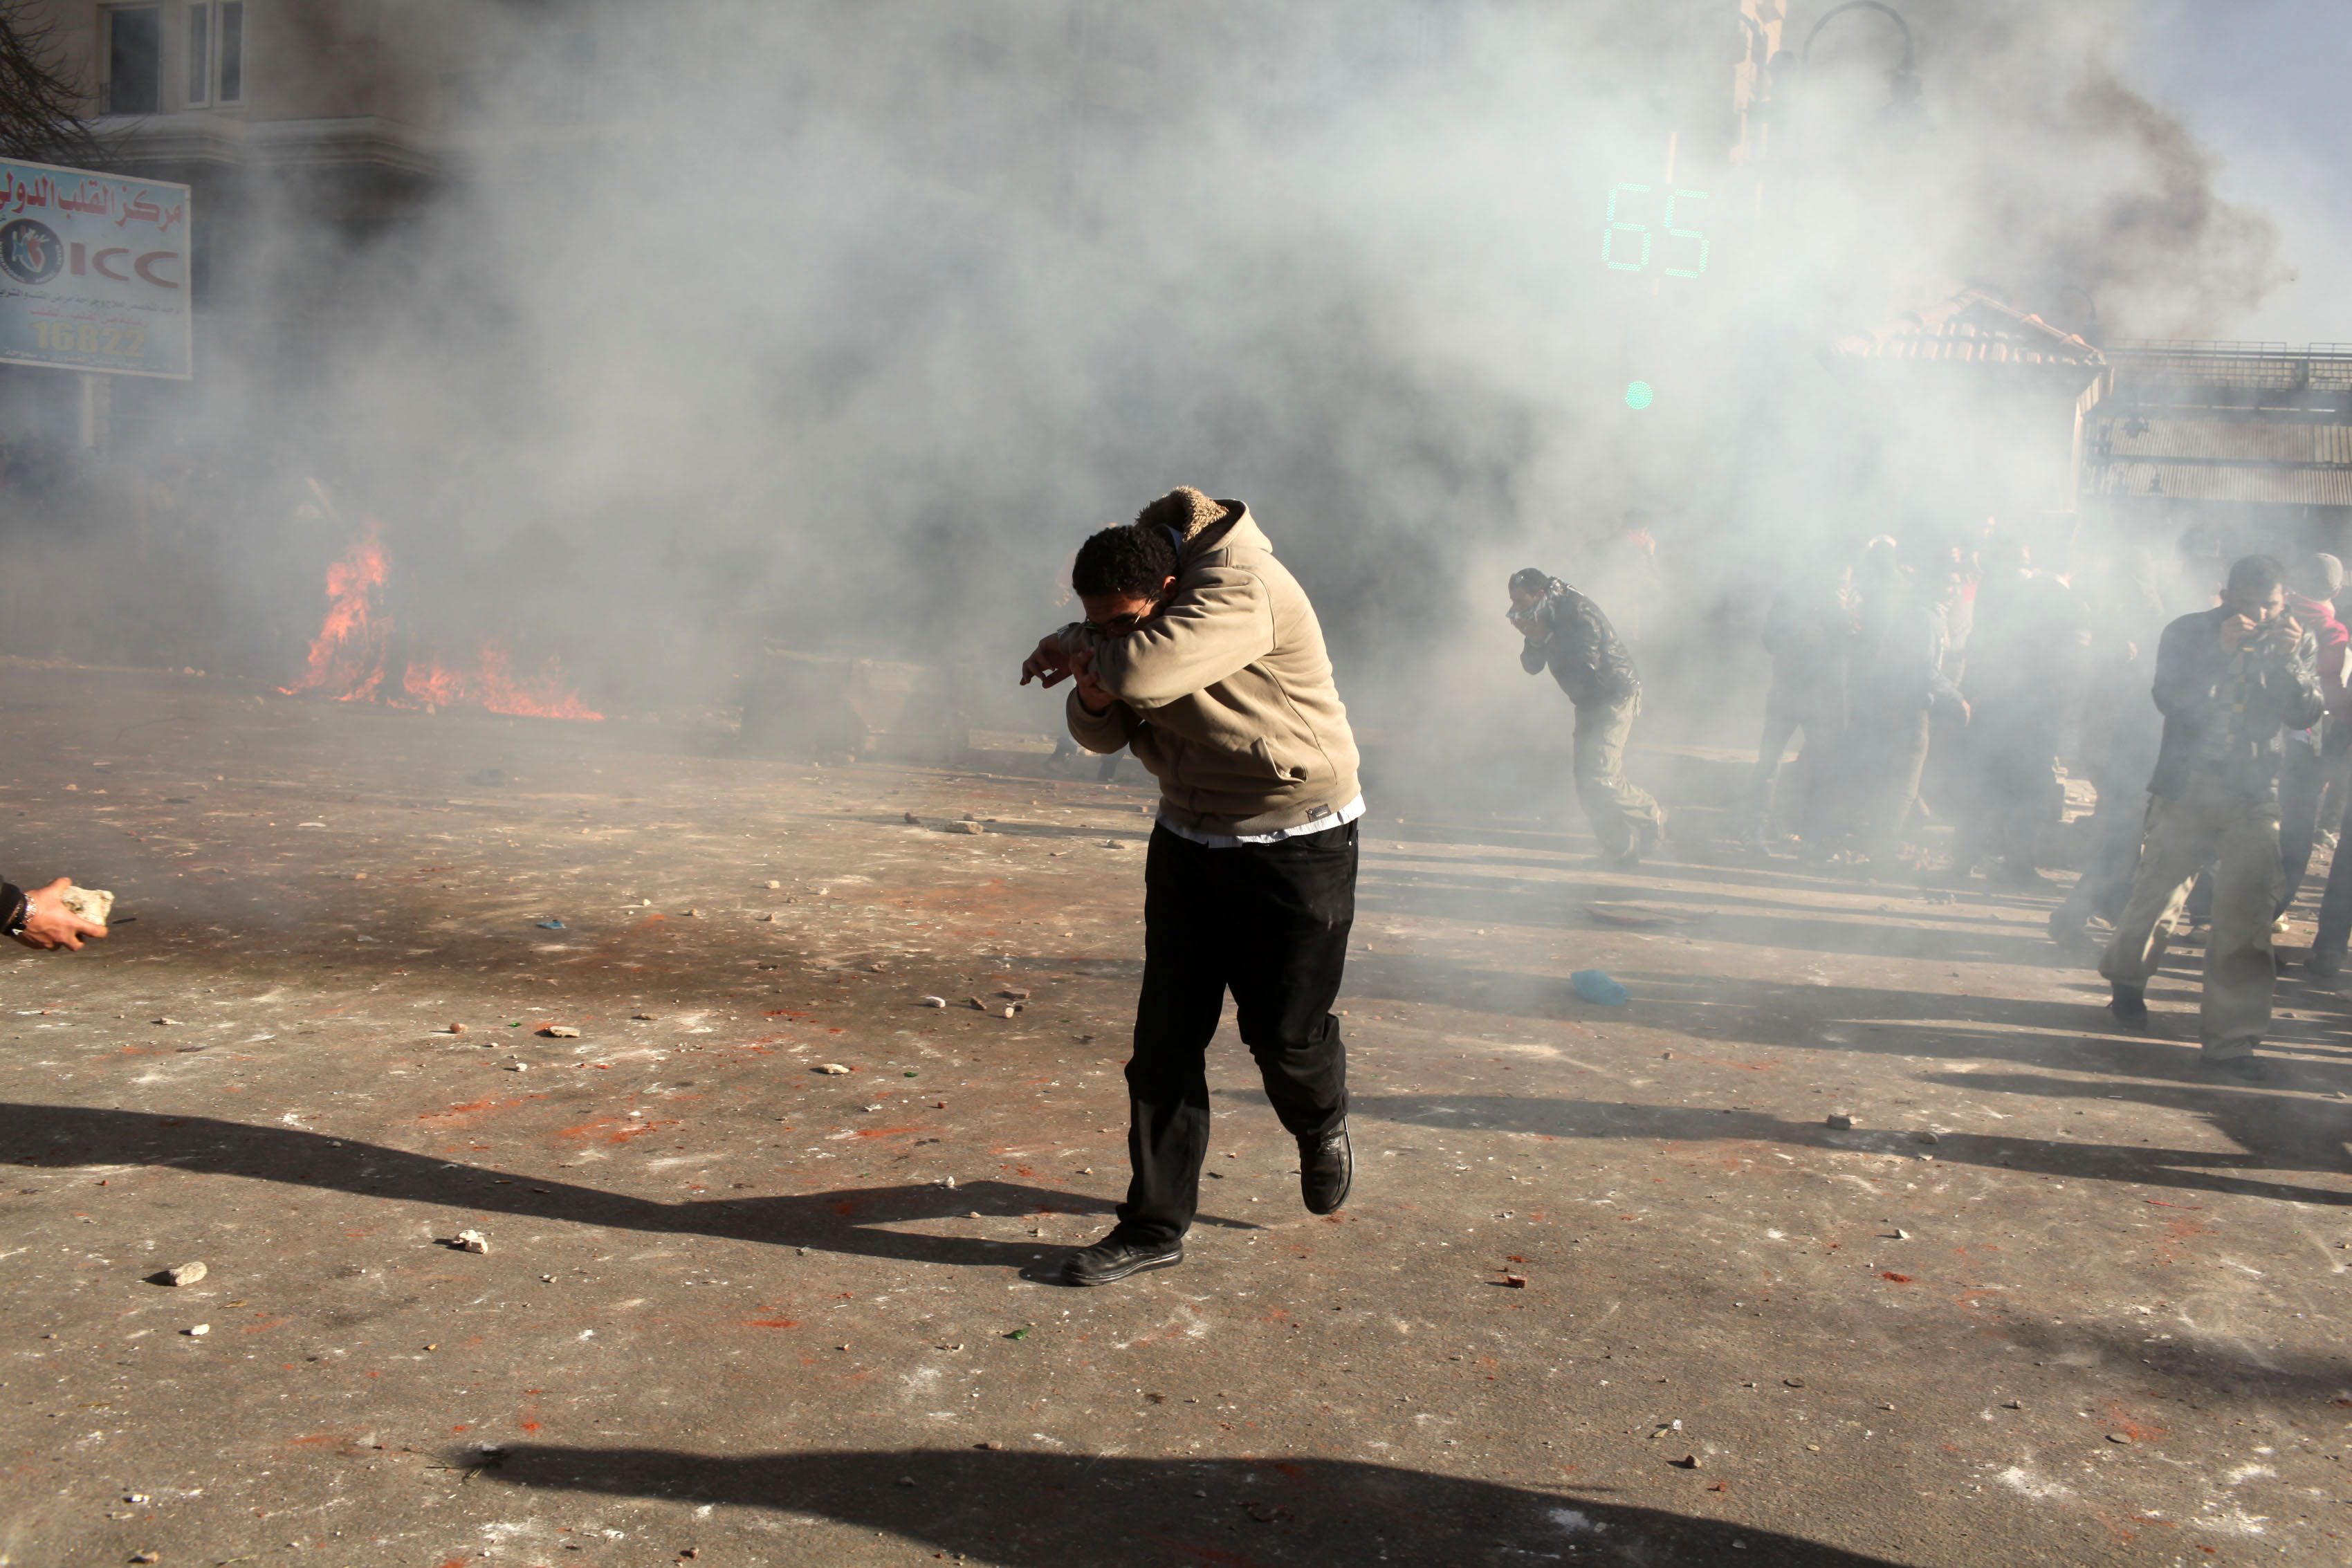 Security forces teargas Islamists' protest in Cairo